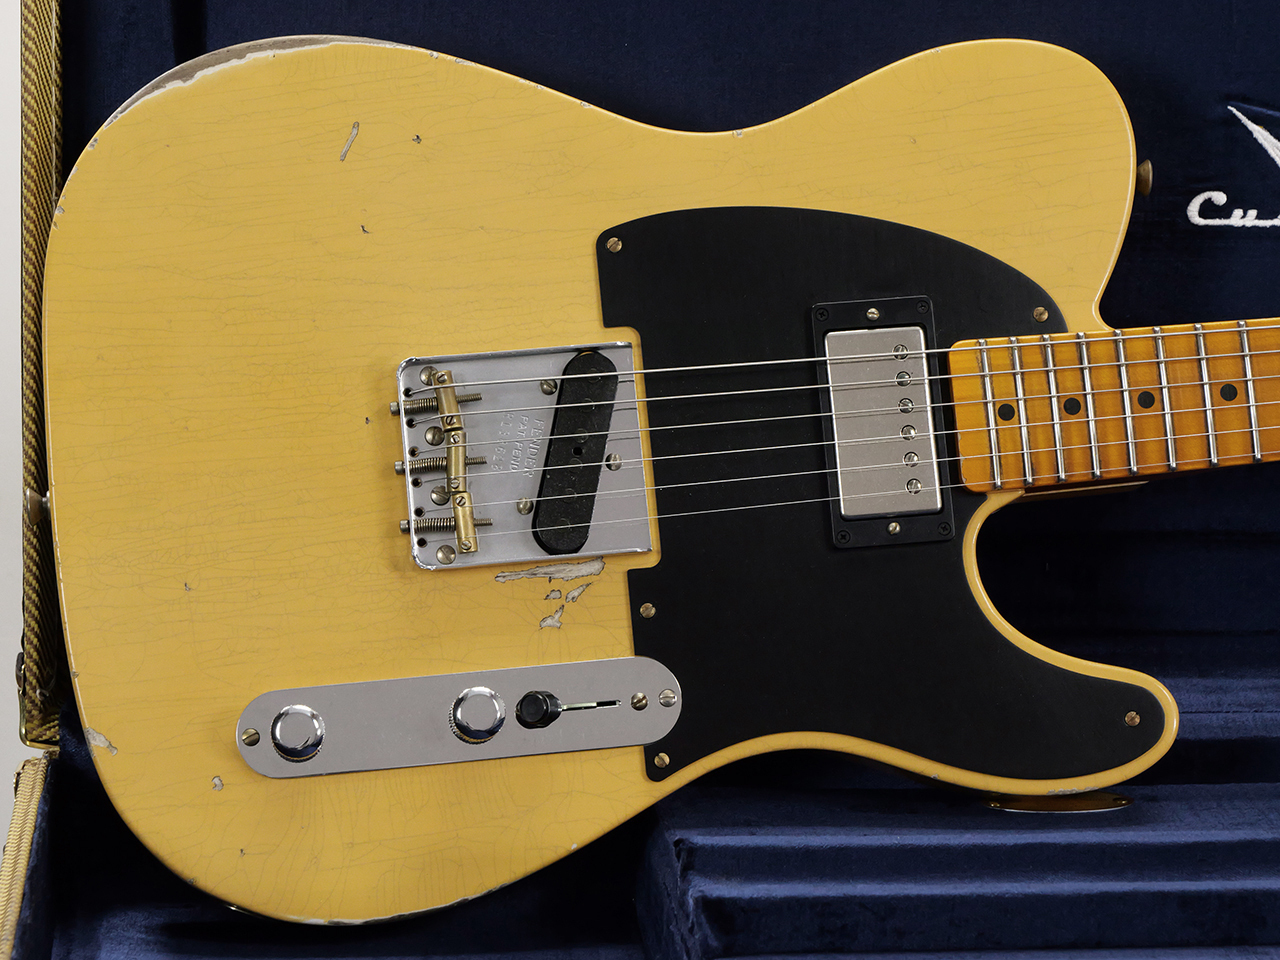 Fender Custom Shop 2018 Limited Edition 51 HS Telecaster Relic